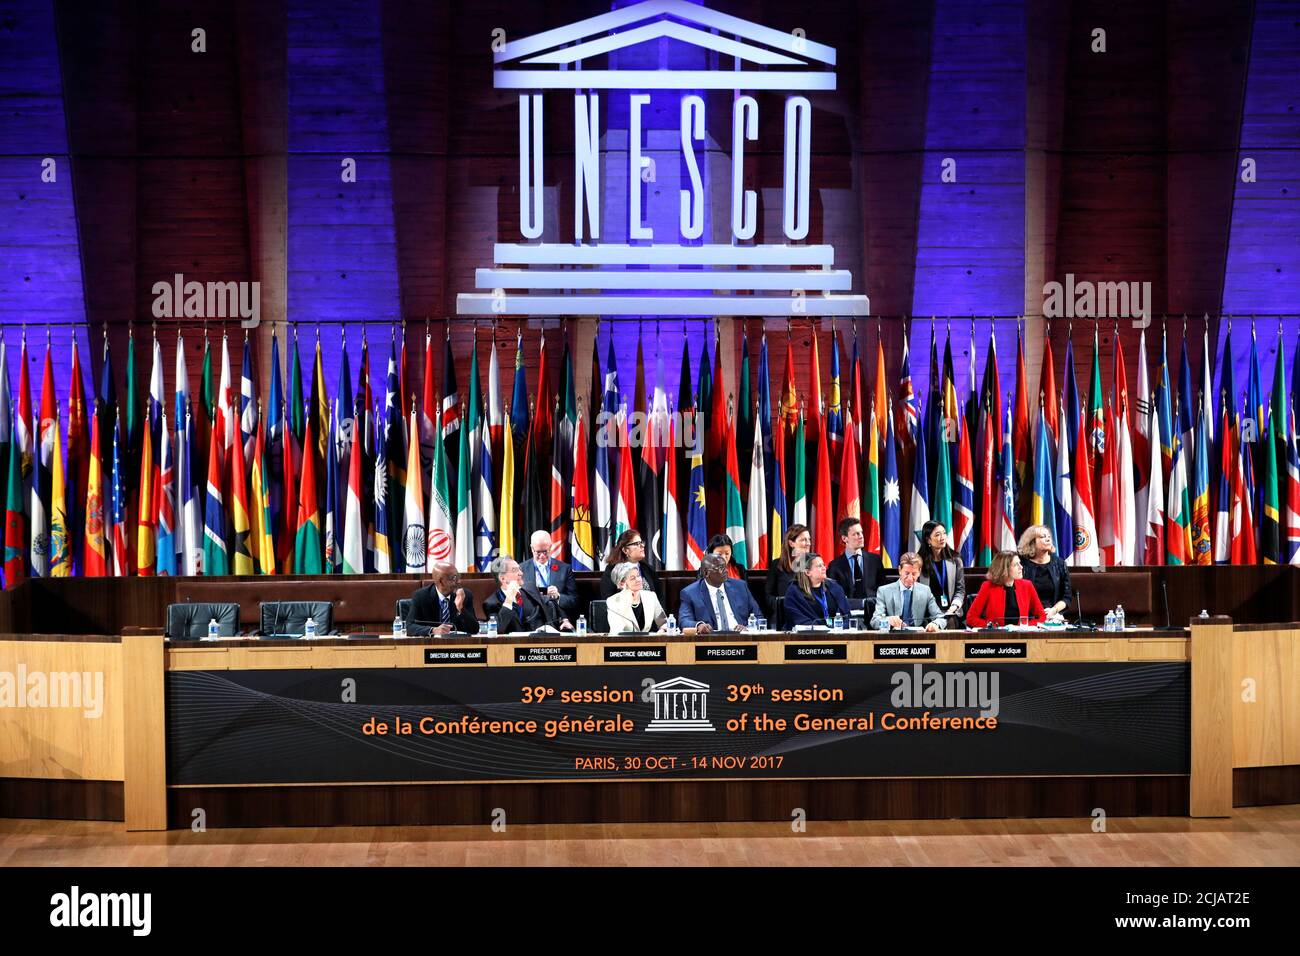 UNESCO's members attend the opening of the 39th session of the General  Conference of the United Nations Educational, Scientific and Cultural  Organization (UNESCO) at their headquarters in Paris, France, October 30,  2017.